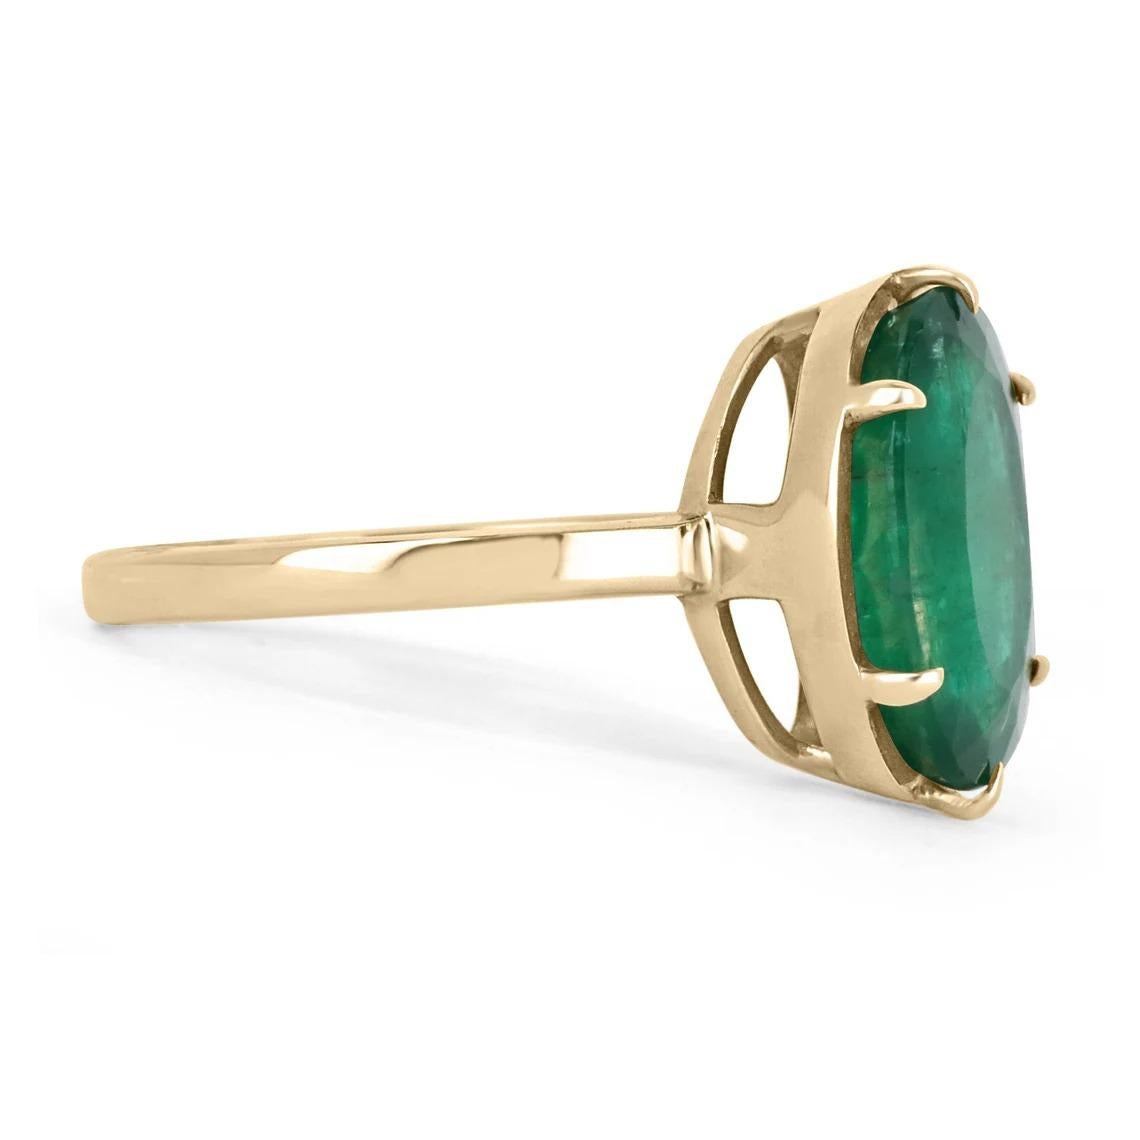 Displayed is a custom emerald solitaire oval-cut engagement/right-hand ring in 14K yellow gold. This gorgeous solitaire ring carries a 4.39-carat emerald in a prong setting. The emerald has very good clarity with minor flaws that are normal in all